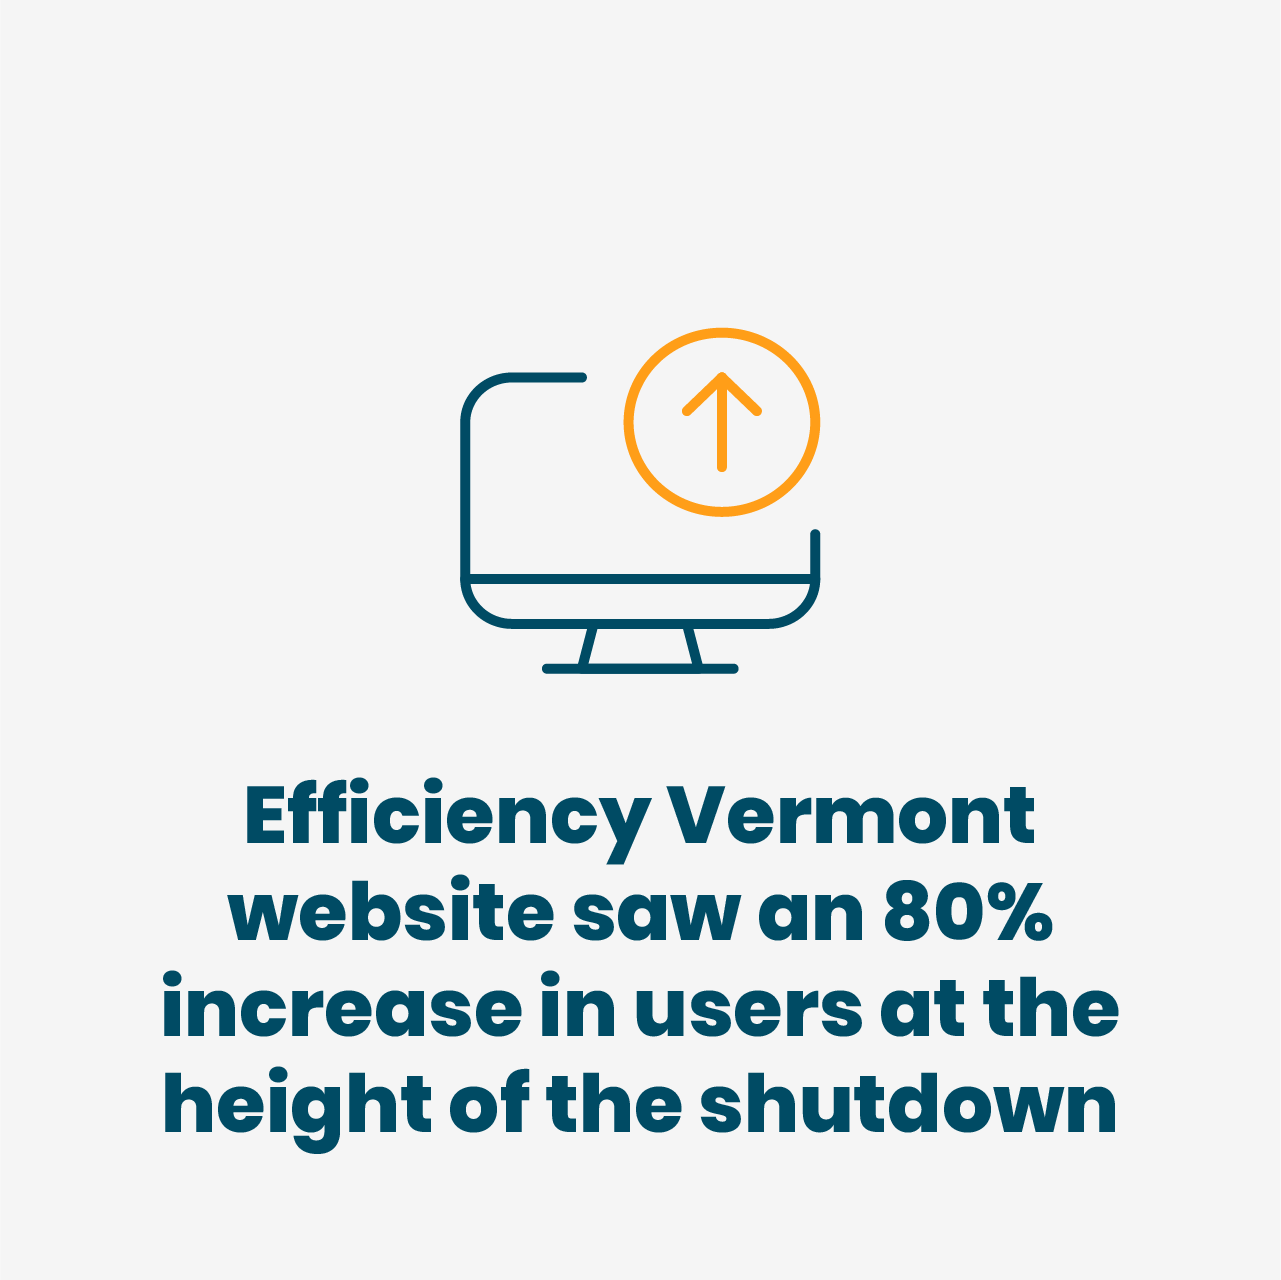 Efficiency Vermont website saw an 80% increase in users at the height of the shutdown